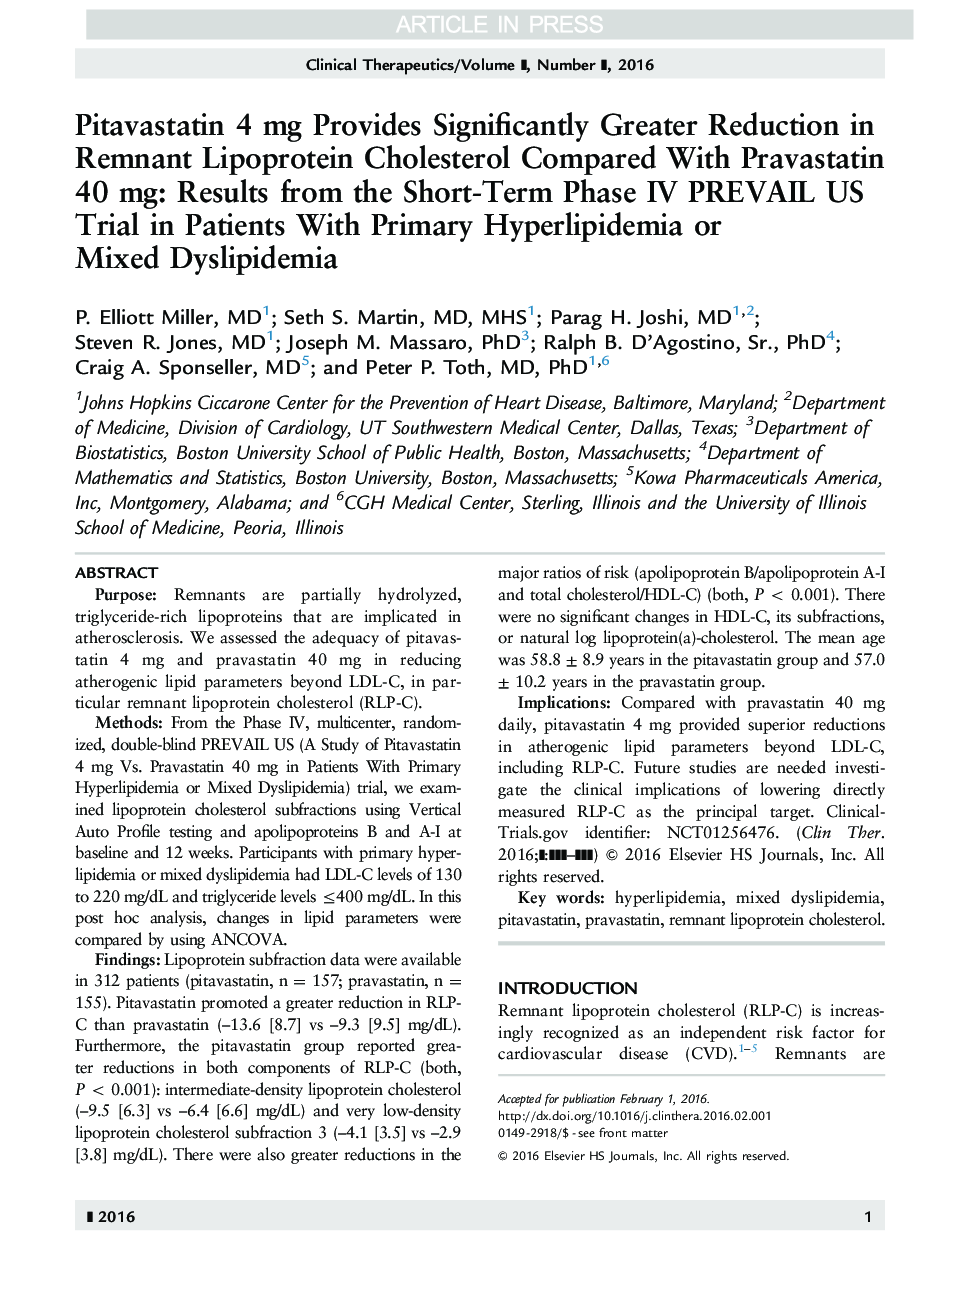 Pitavastatin 4 mg Provides Significantly Greater Reduction in Remnant Lipoprotein Cholesterol Compared With Pravastatin 40 mg: Results from the Short-term Phase IV PREVAIL US Trial in Patients With Primary Hyperlipidemia or Mixed Dyslipidemia